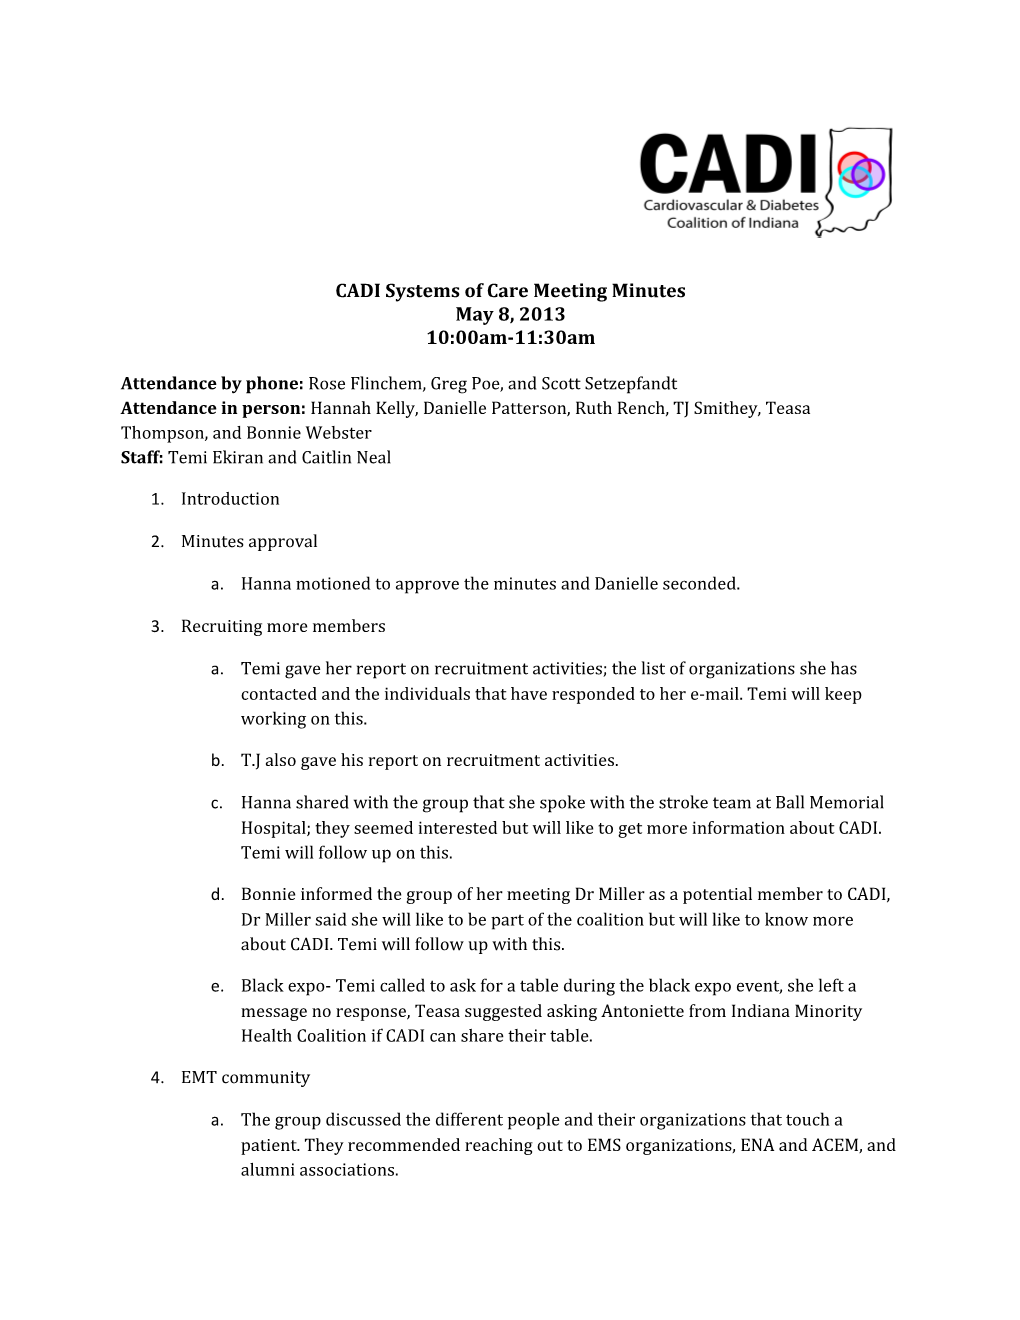 CADI Systems of Care Meeting Minutes